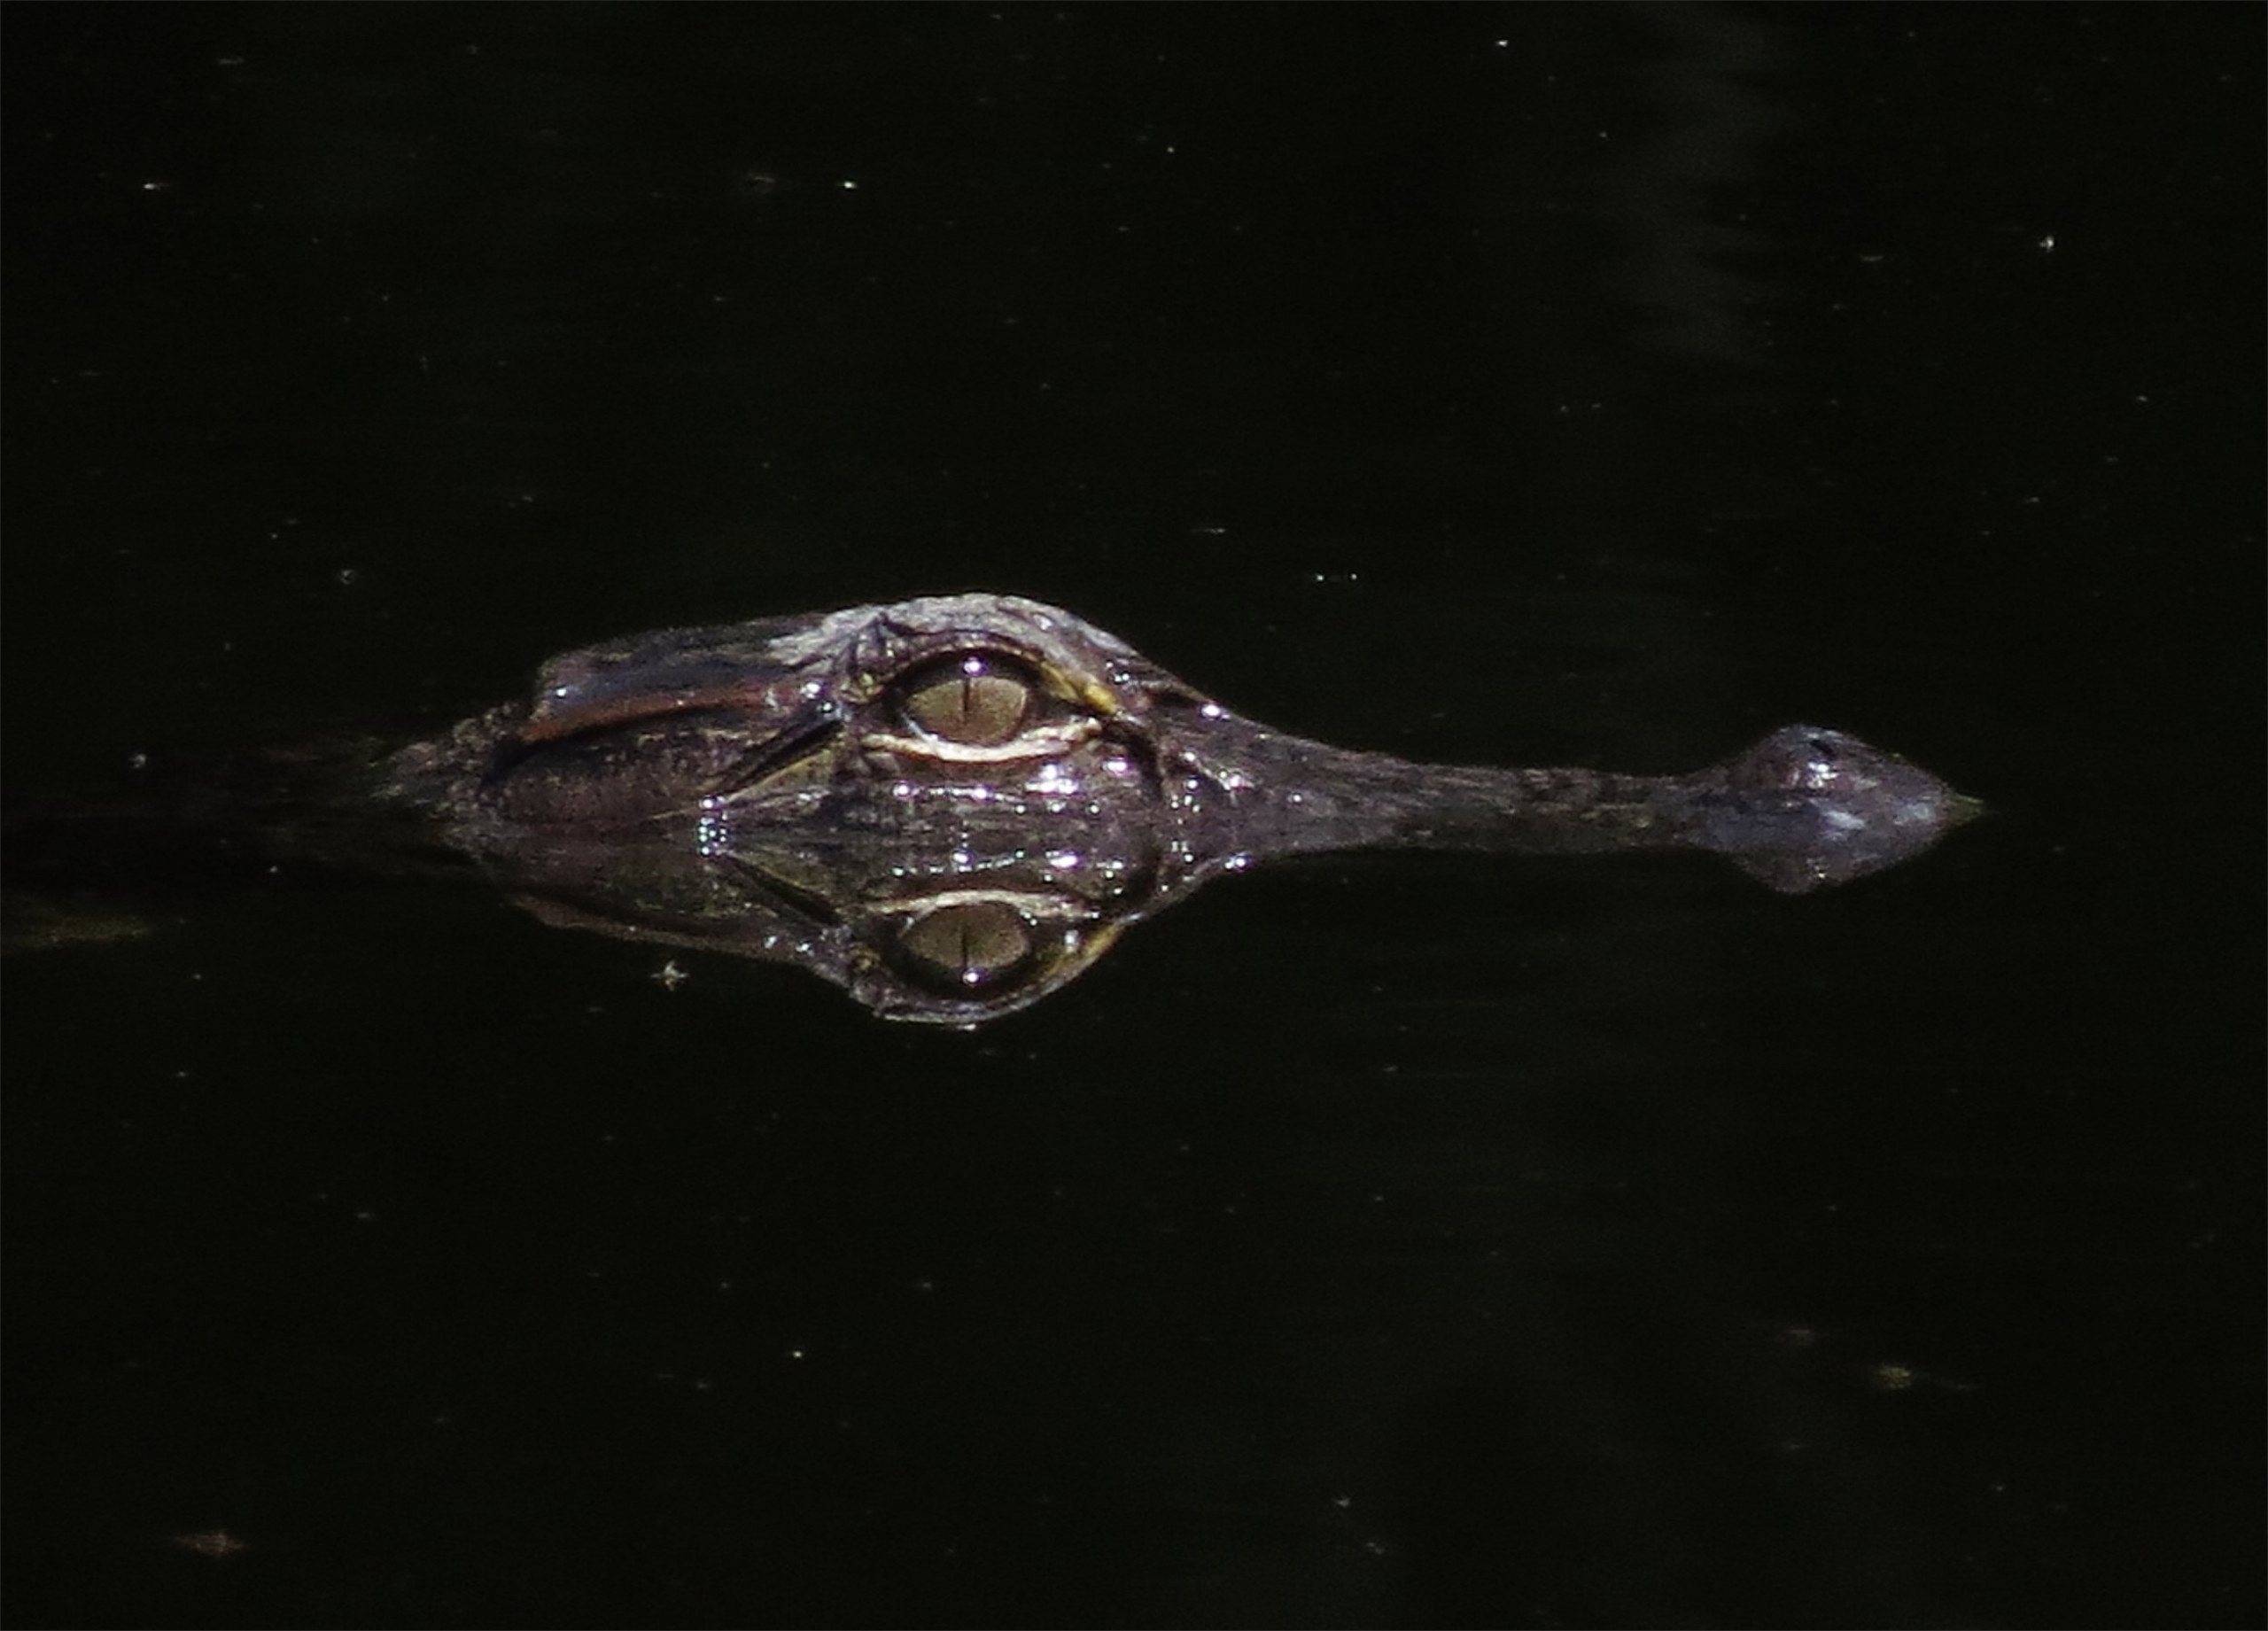 Ghost-like reflection of alligator.